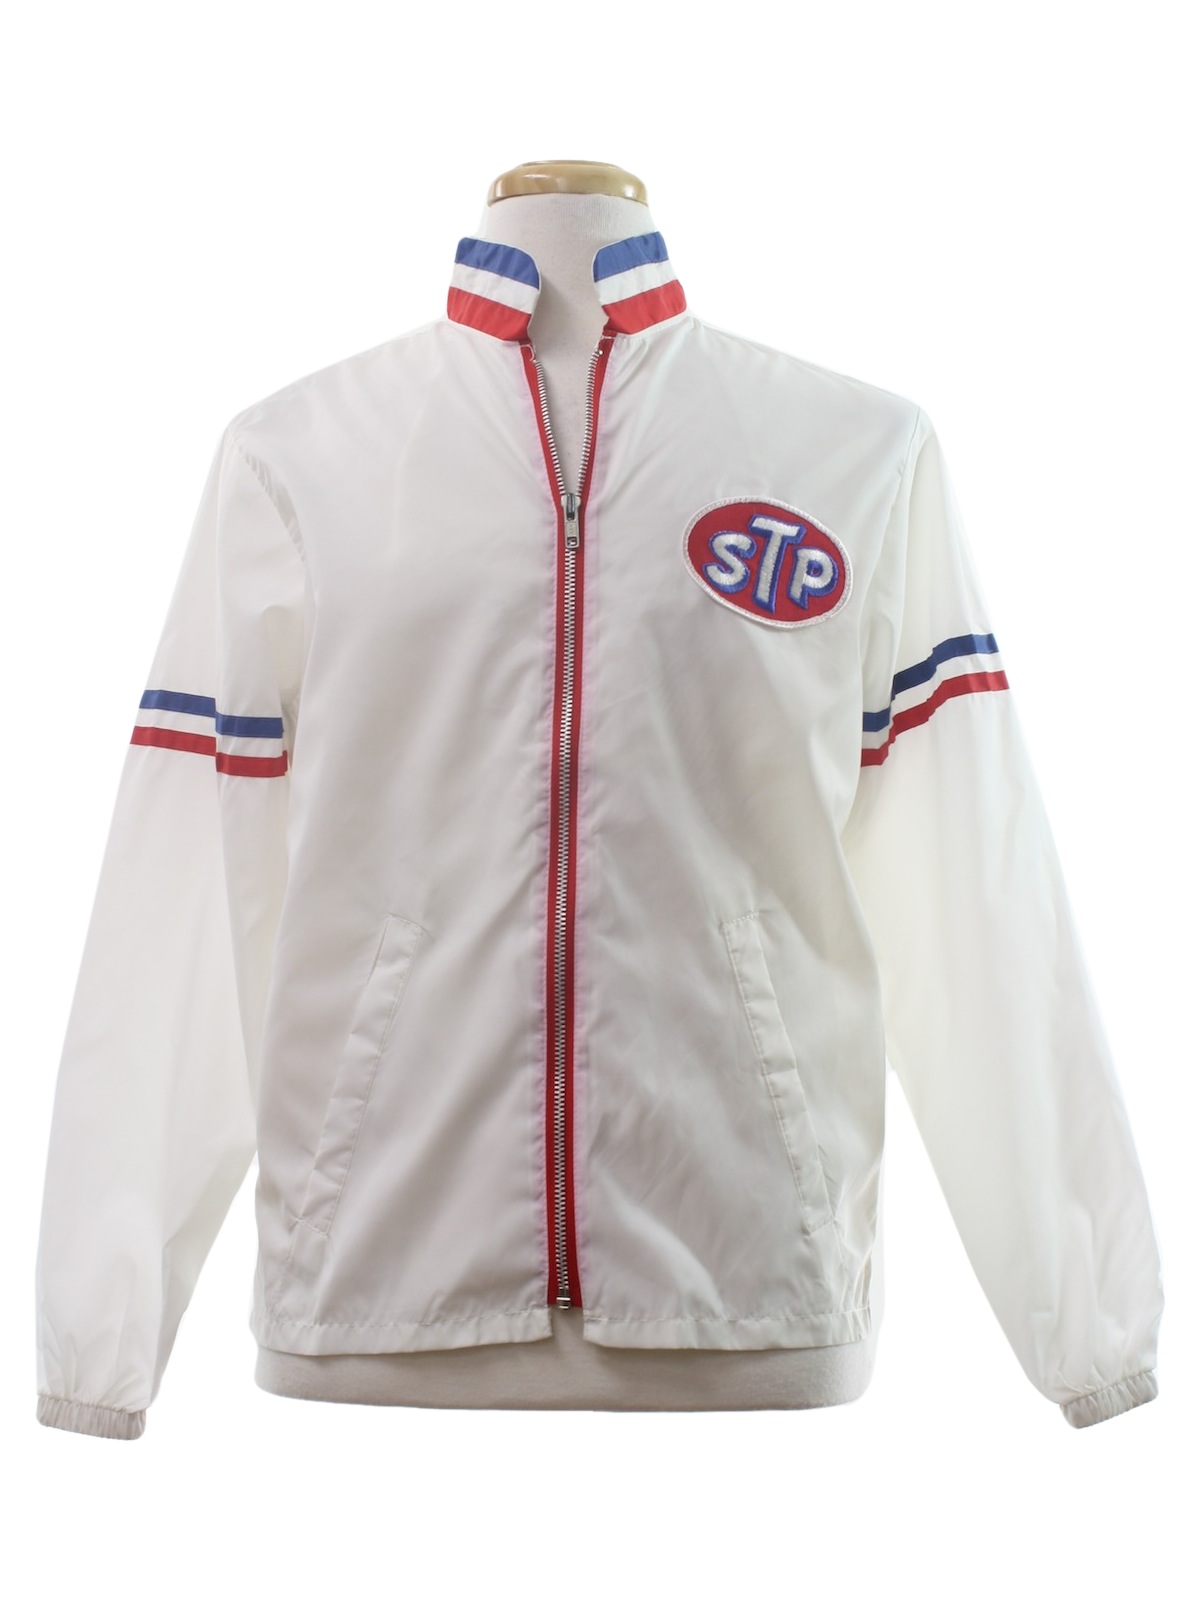 Don Jac 1970s Vintage Jacket: 70s -Don Jac- Mens white, red and blue ...